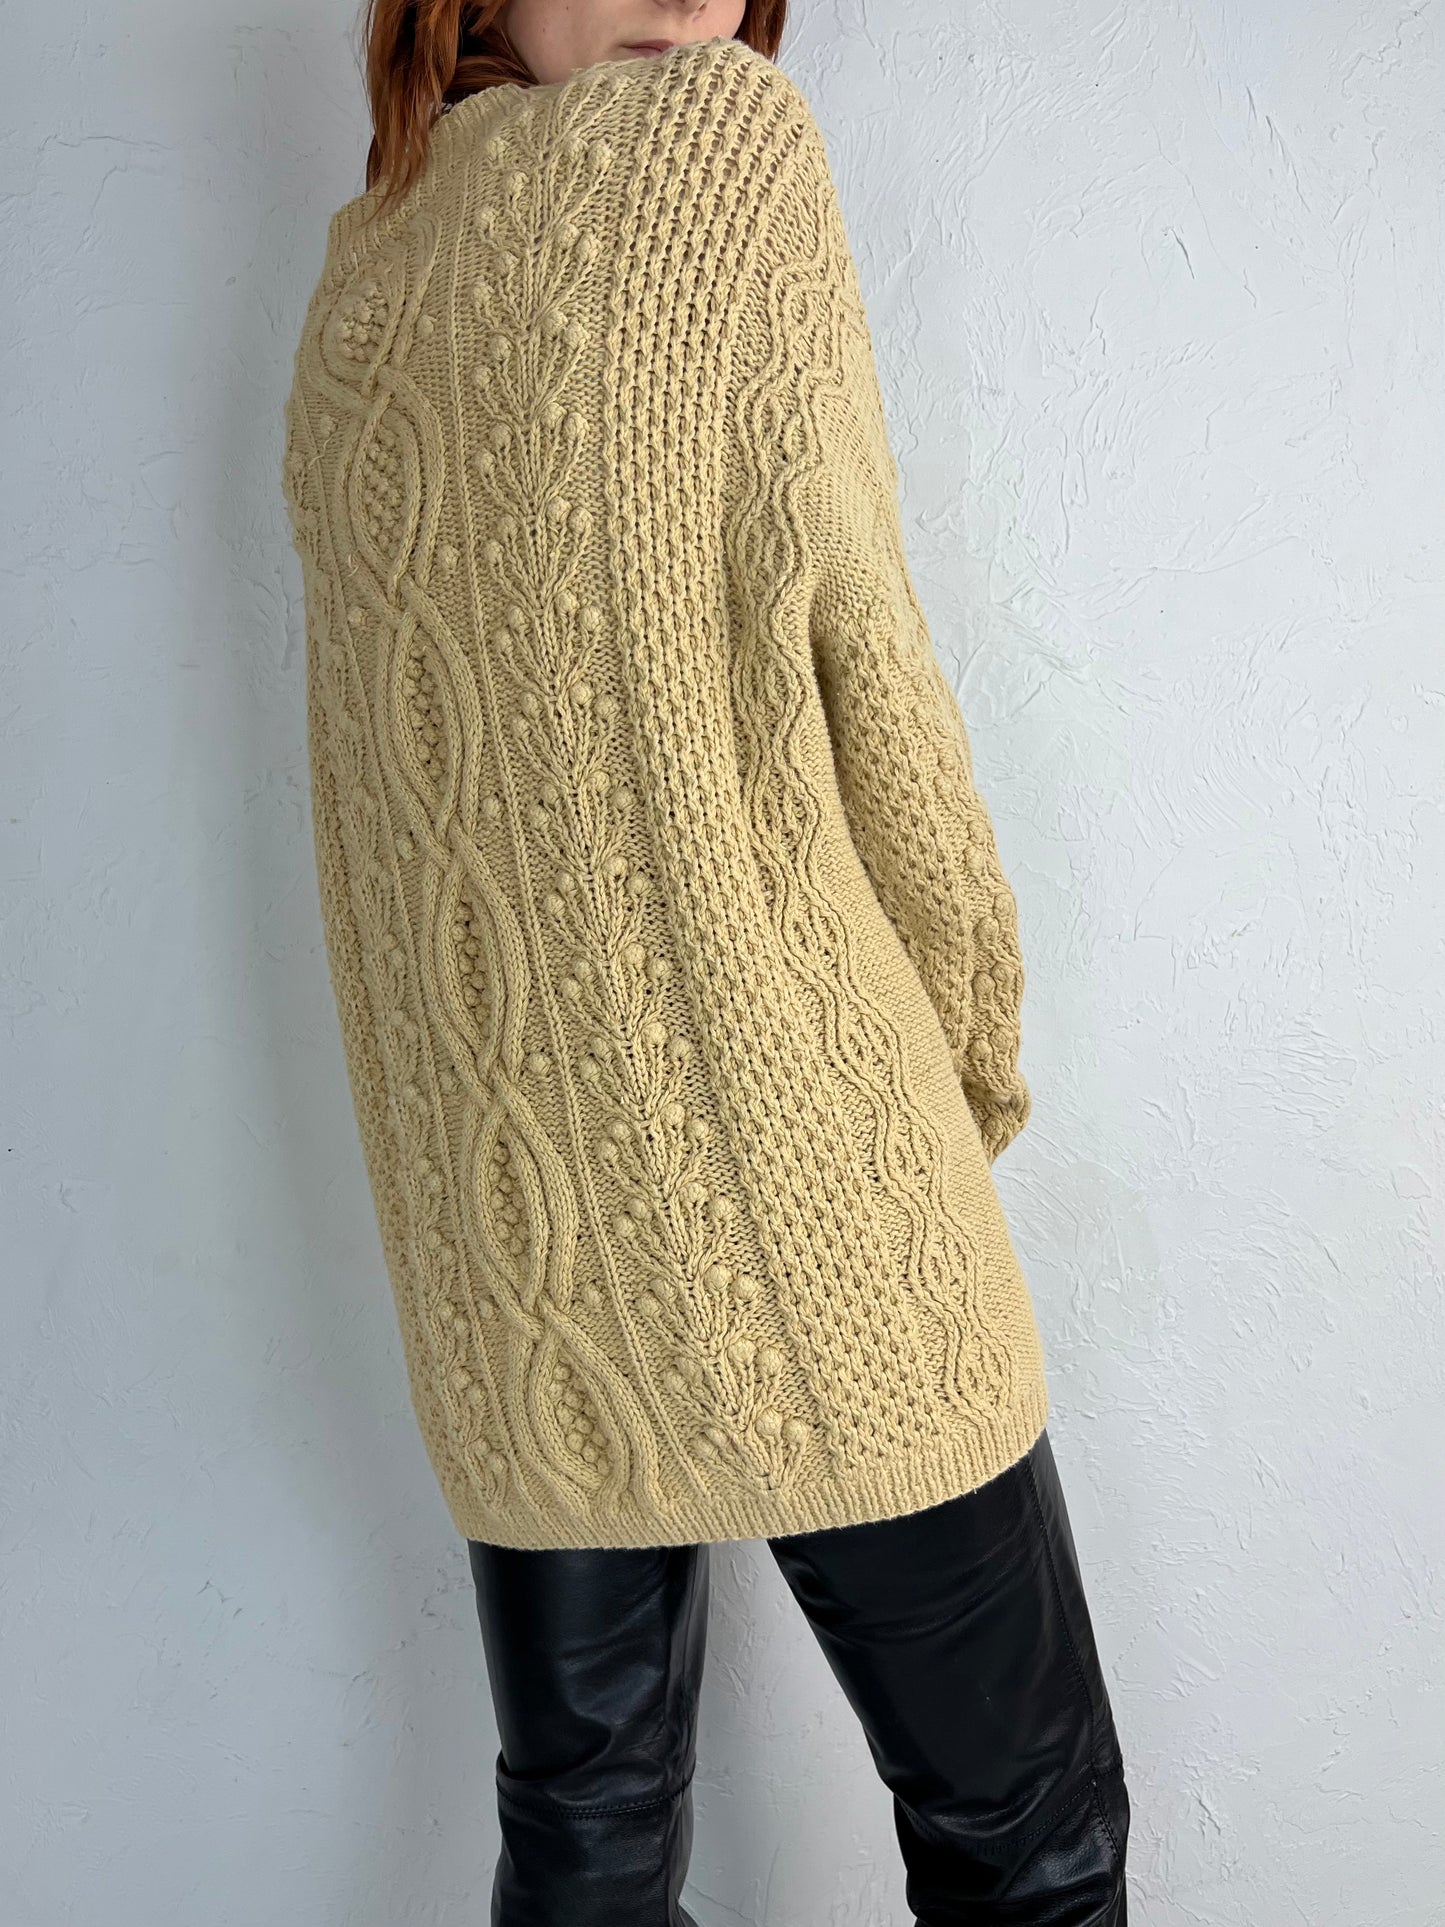 90s 'Express' Beige Cotton Ramie Oversized Knit Sweater / Small